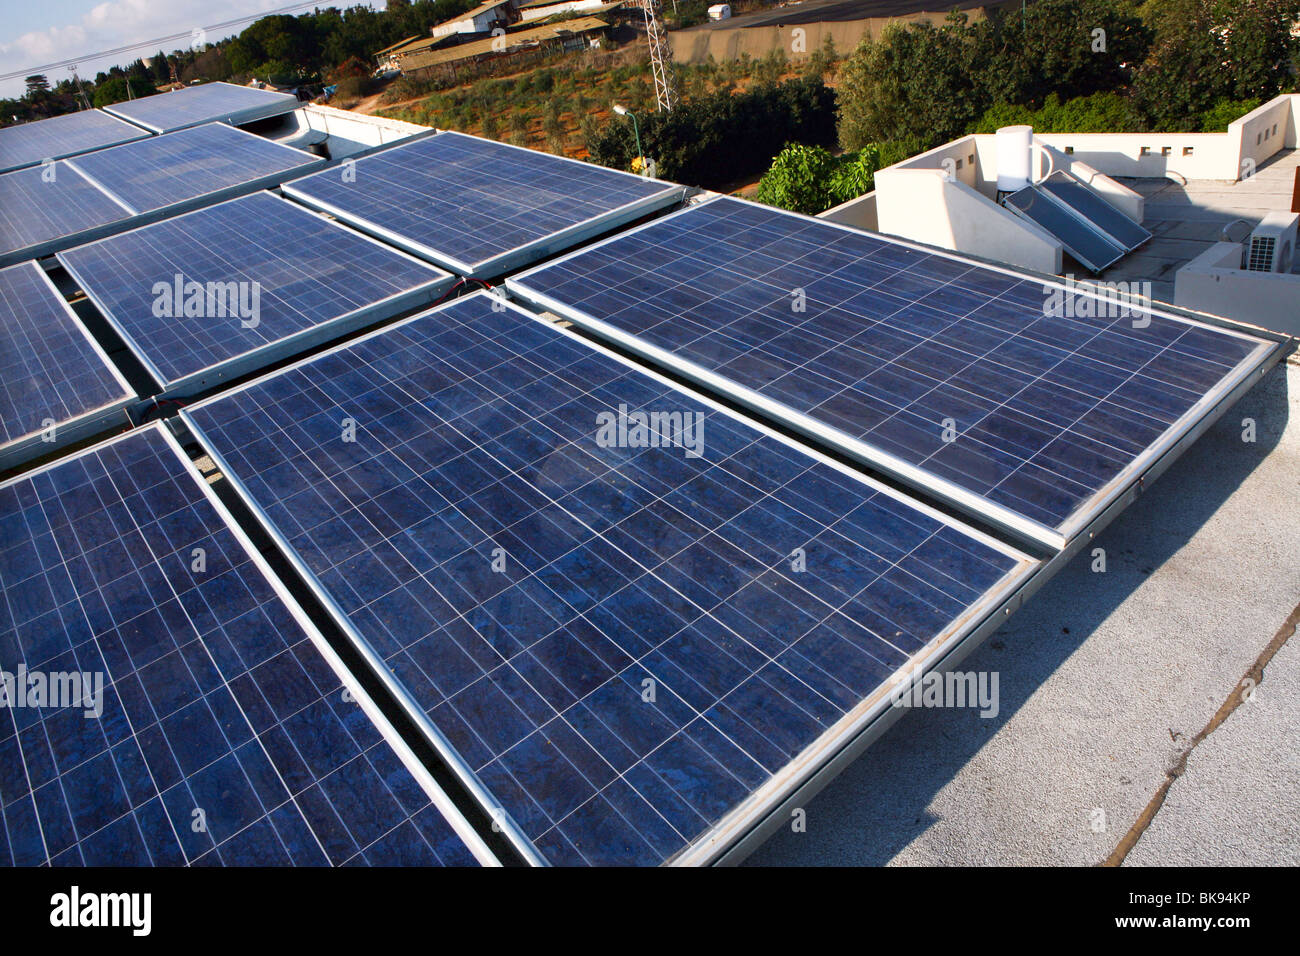 Israel, Solar panels on the roof of a private home, supplying all the electricity the household needs Stock Photo